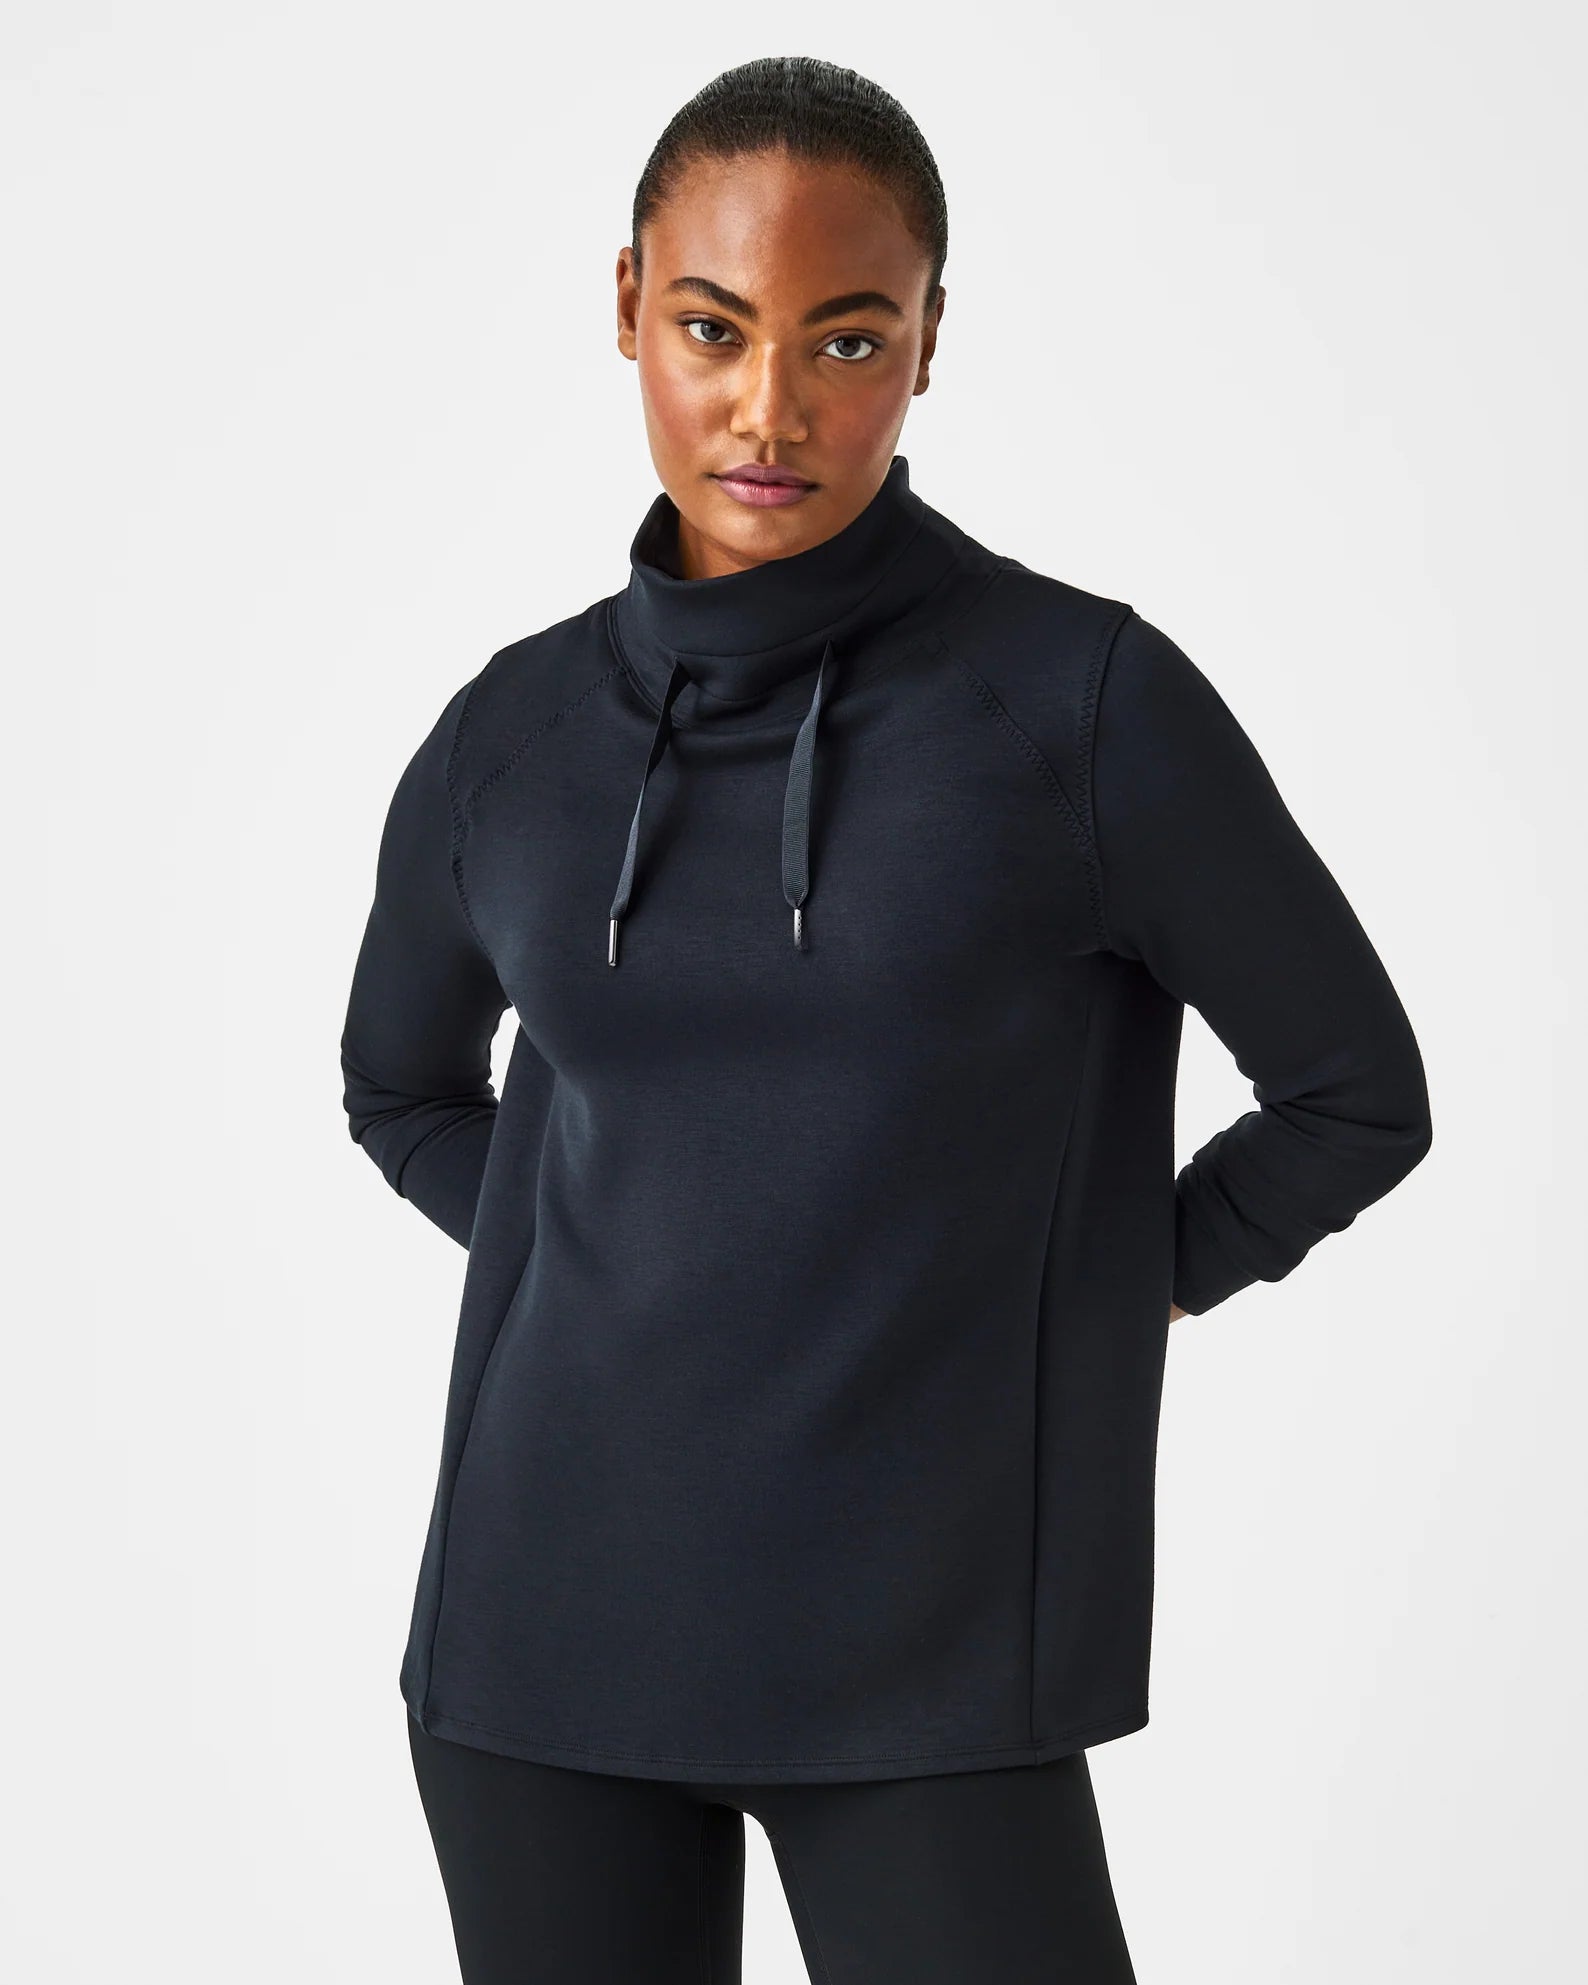 AirEssentials Got-Ya-Covered Pullover-Very Black